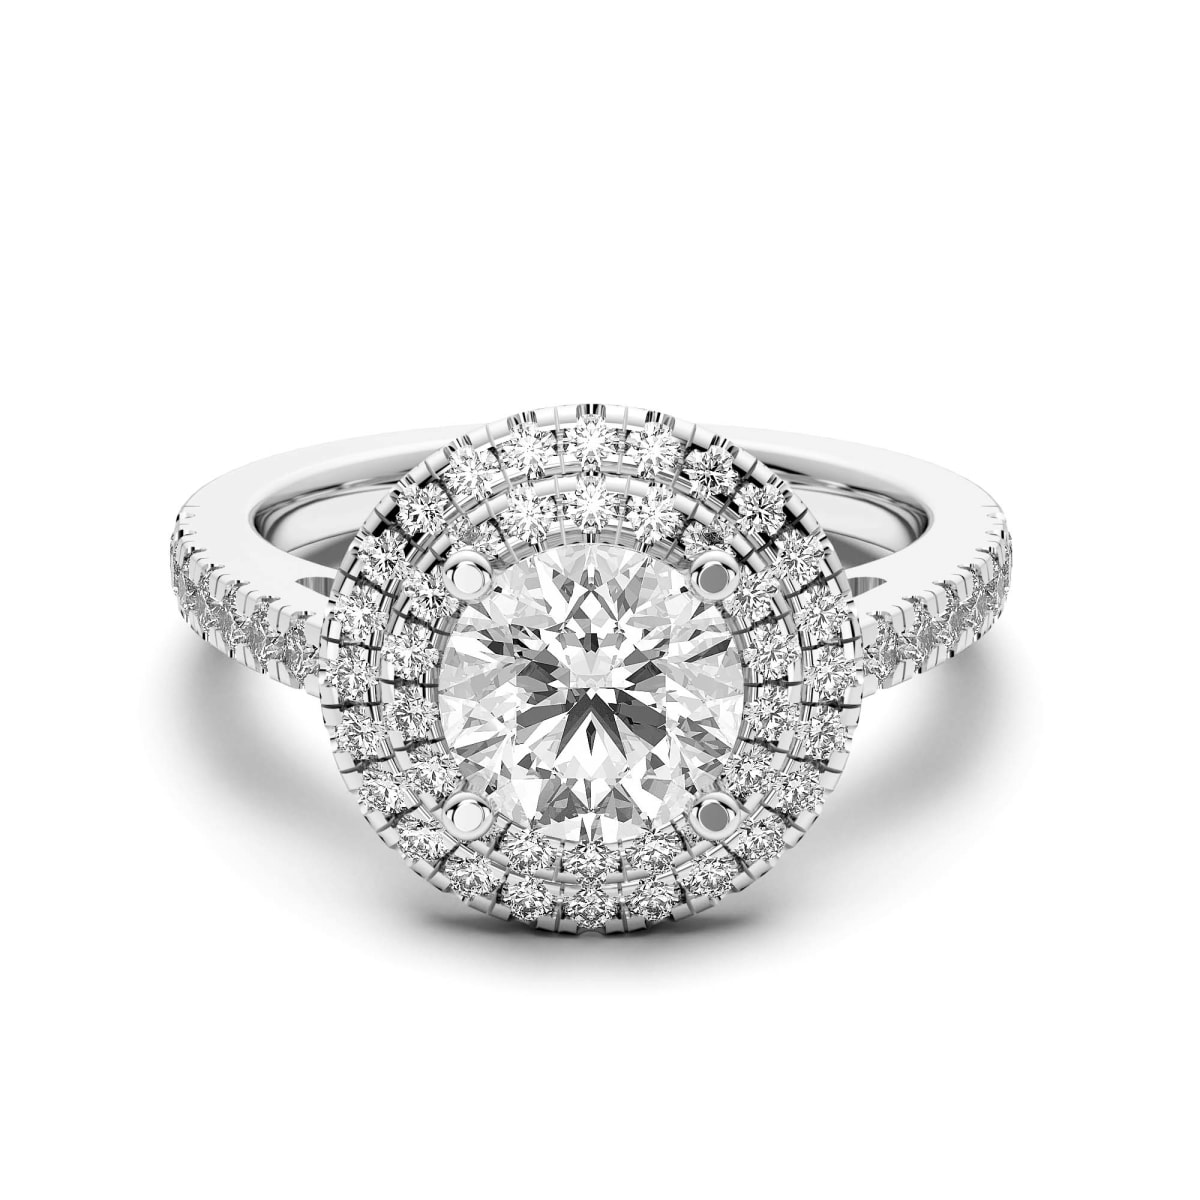 PEAR-SHAPED DIAMOND ENGAGEMENT RING | SOLITAIRE JEWELS DUBAI, UAE –  Solitaire Jewels